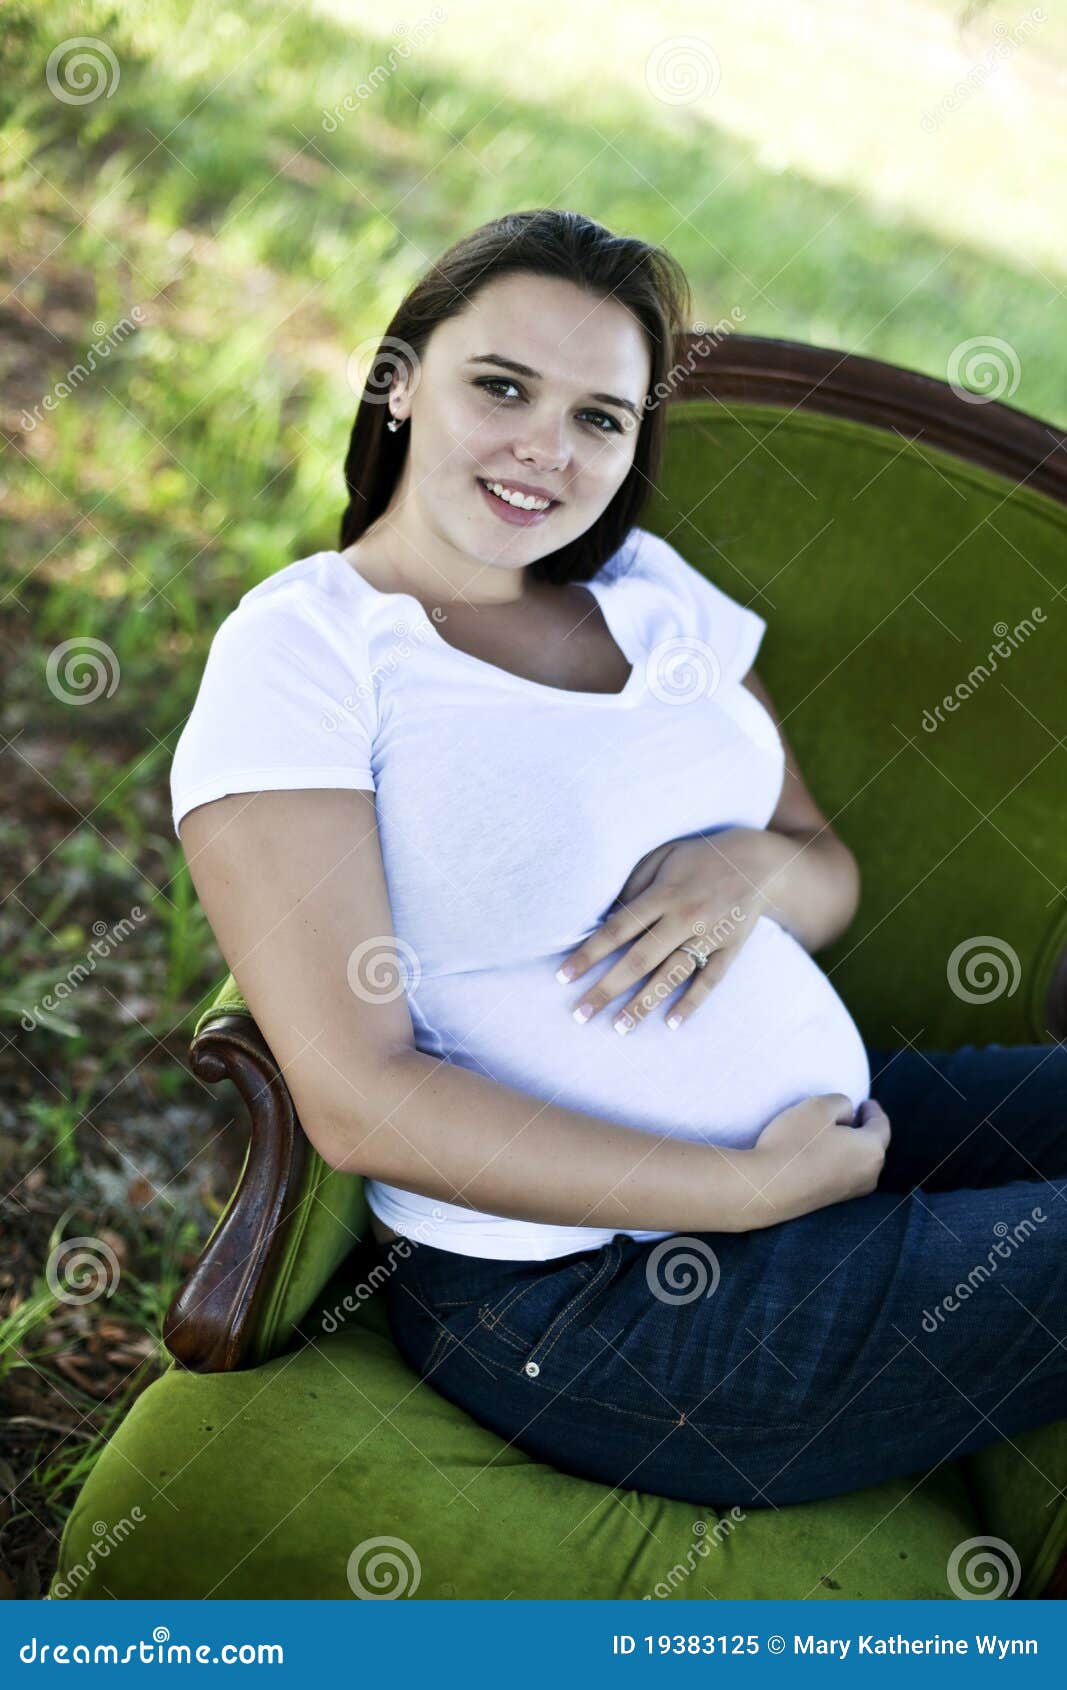 11,453 Pregnant Woman Chair Images, Stock Photos, 3D objects